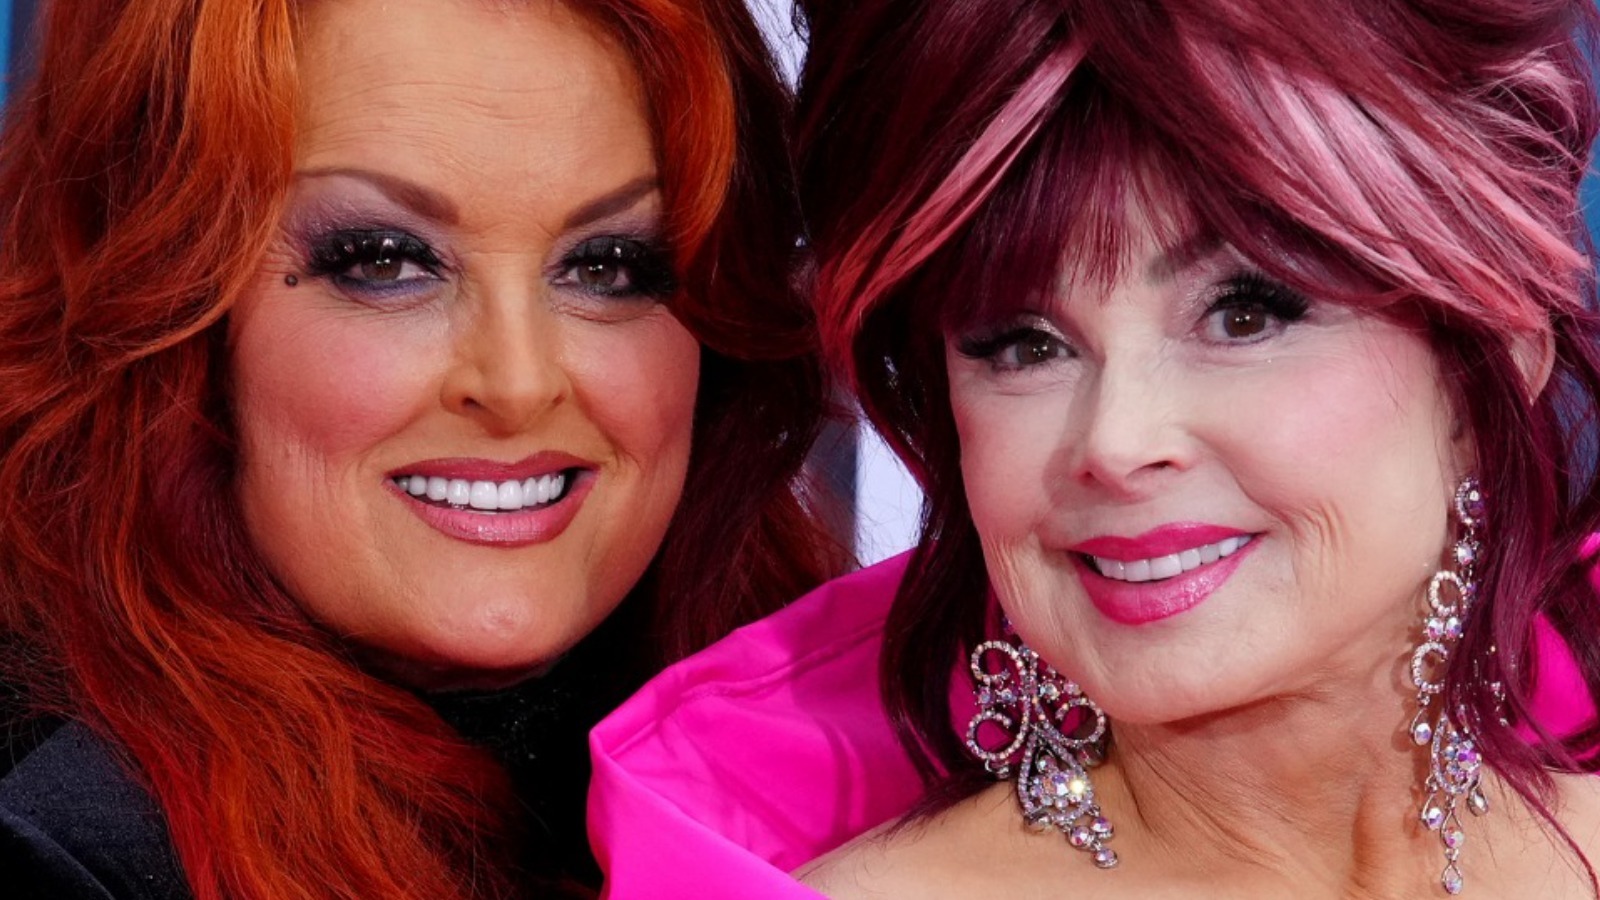 Naomi And Wynonna Judd Make The CMT Music Award Red Carpet A Glamorous